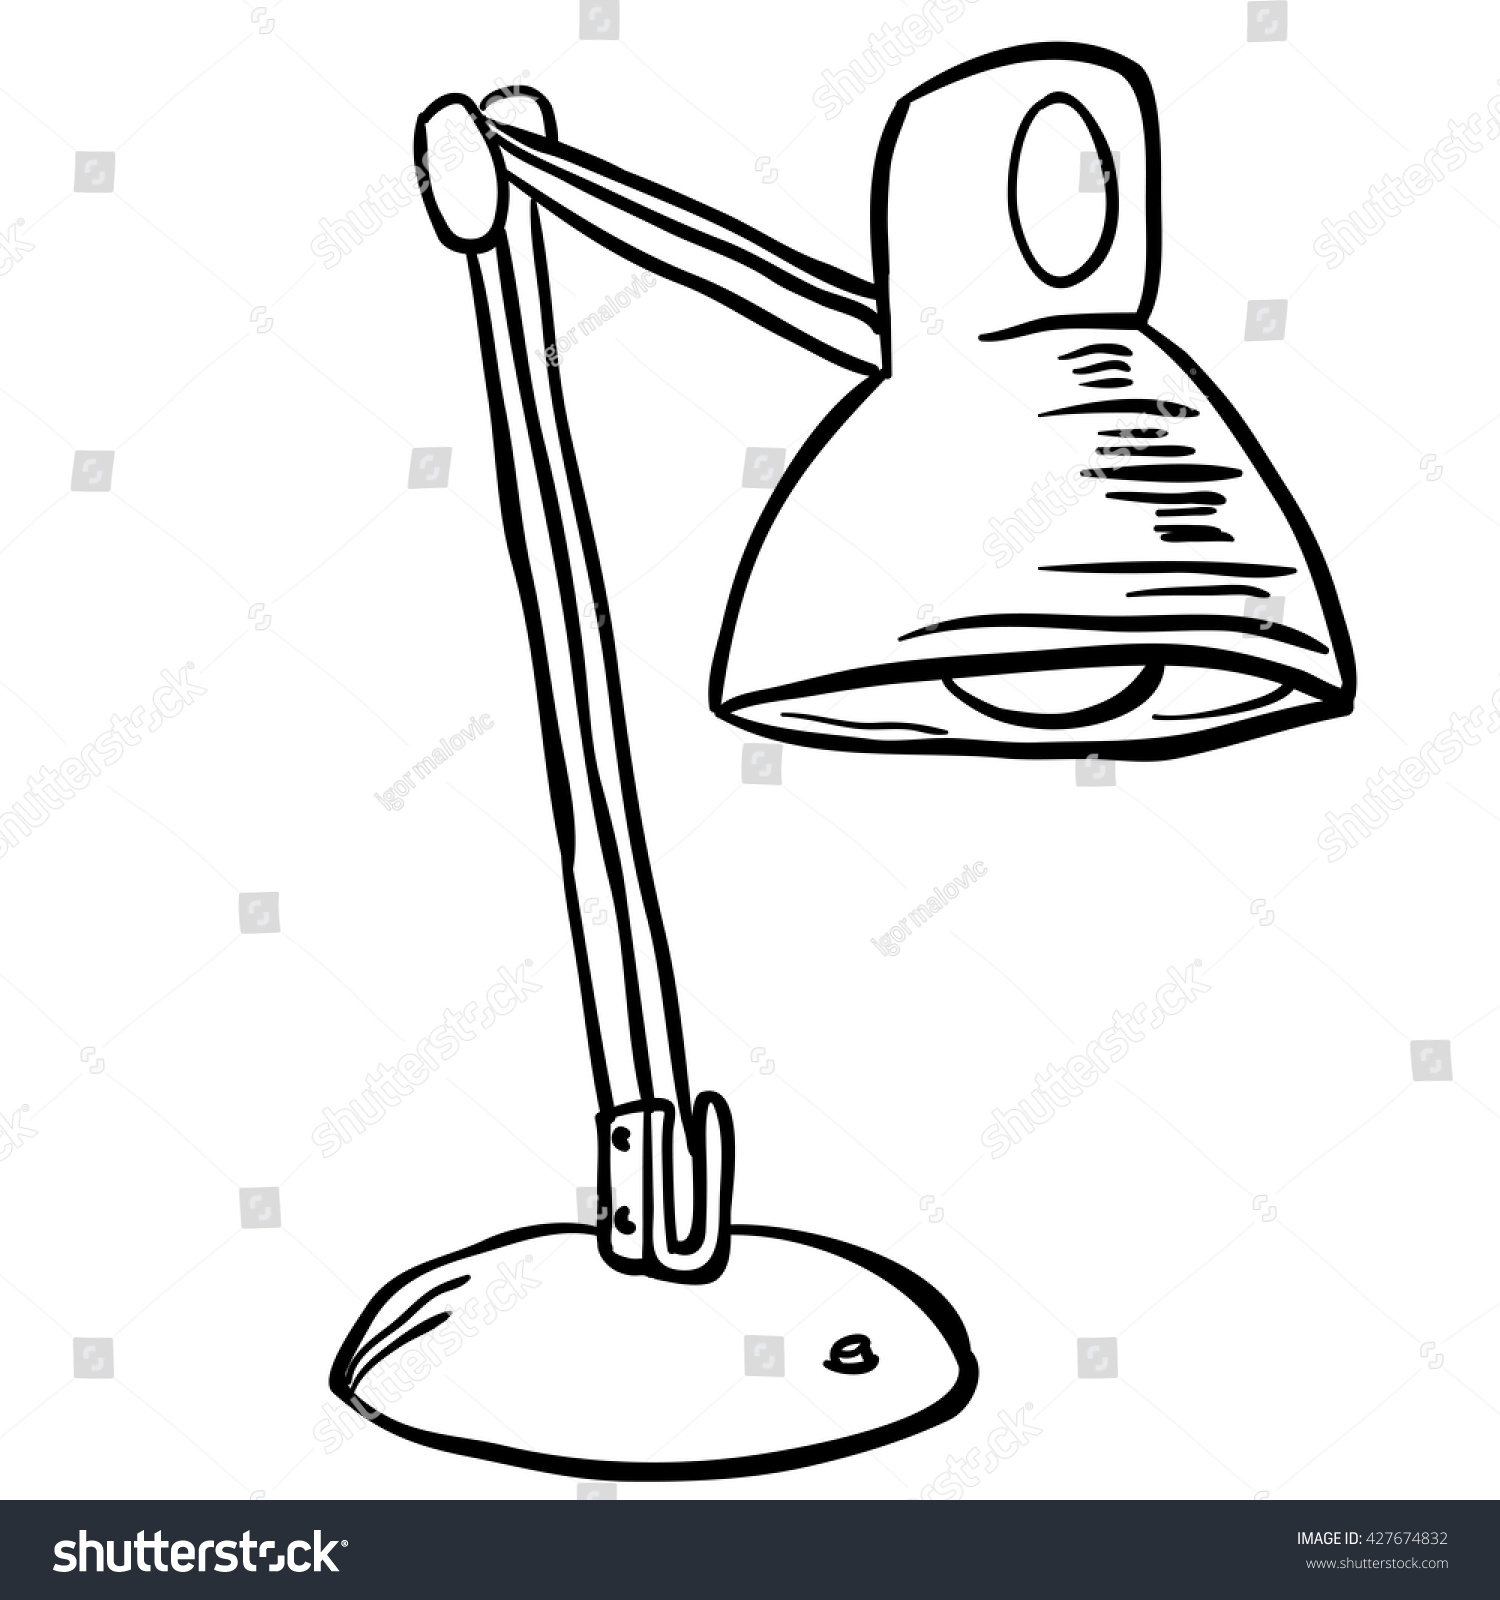 clipart black and white lamp - photo #21